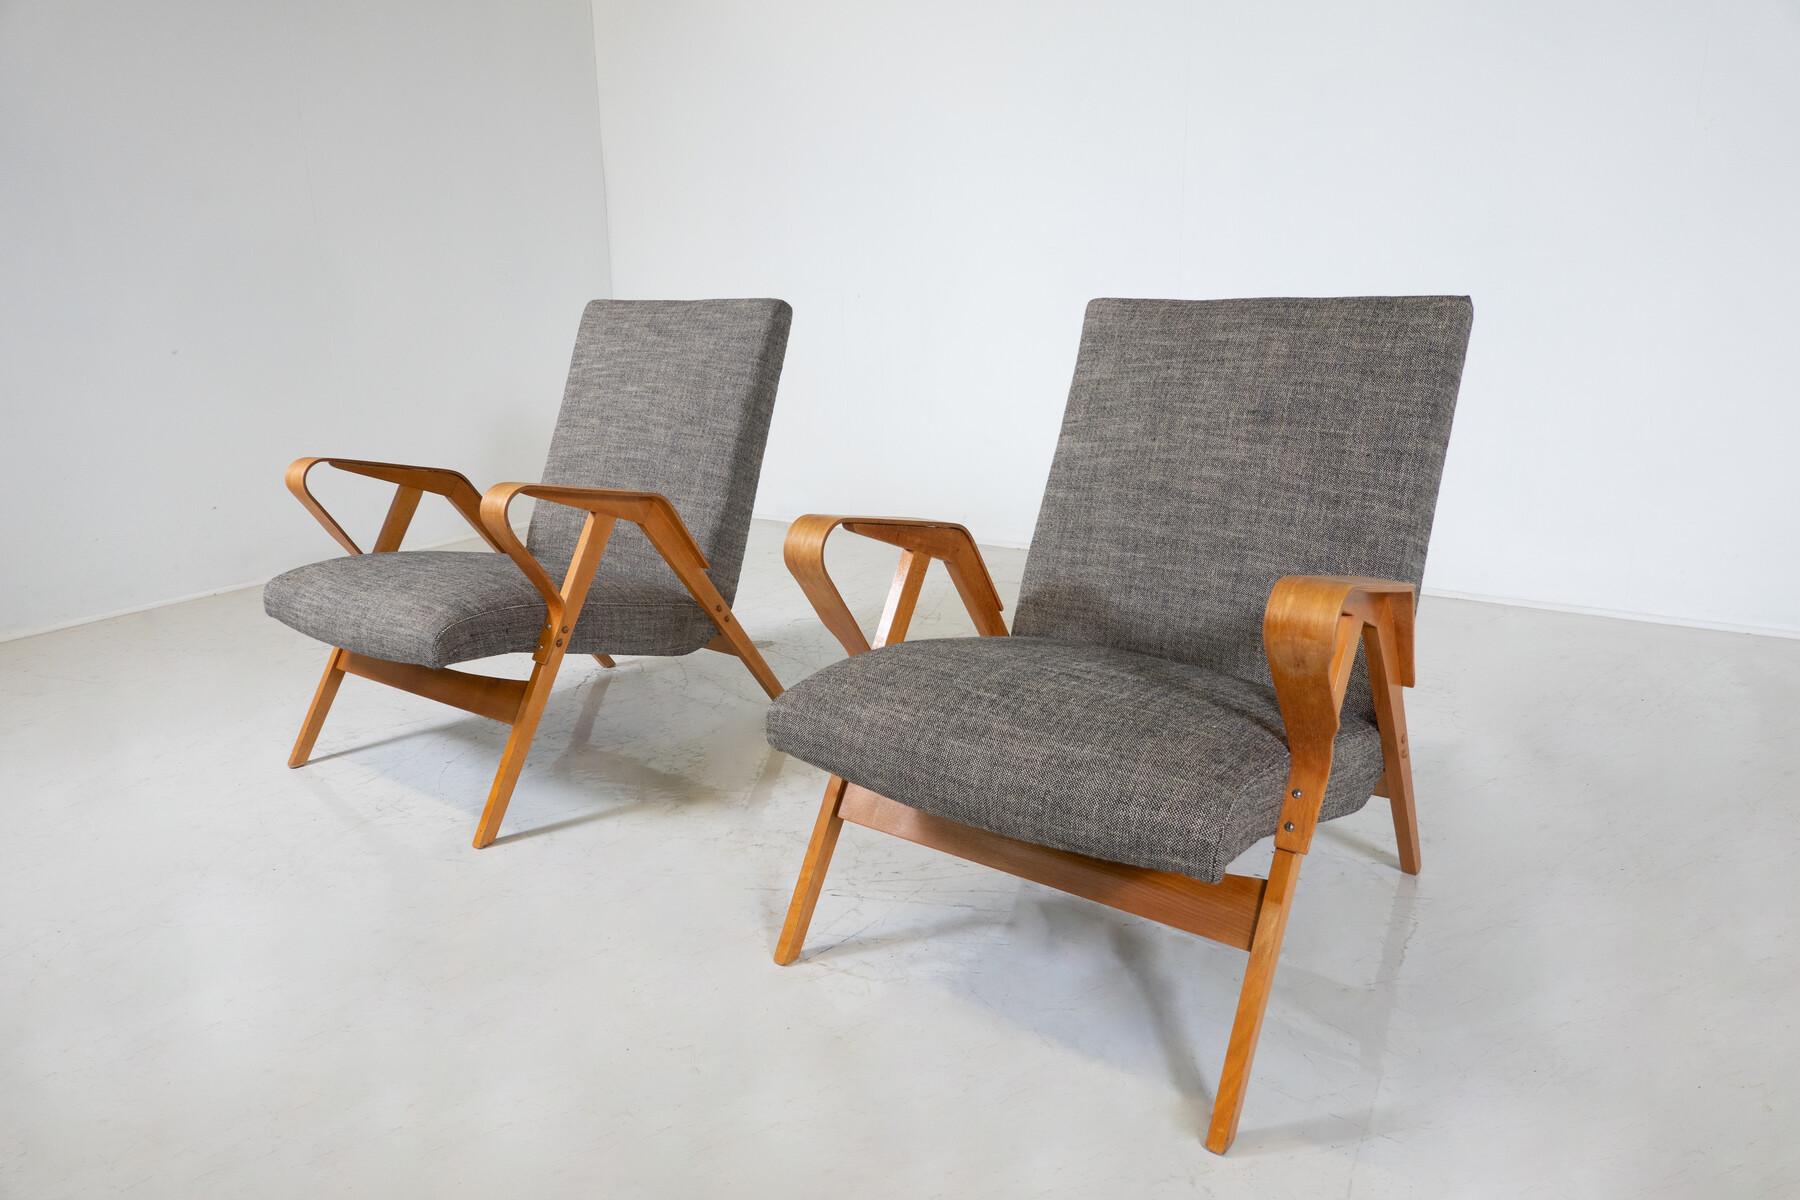 Mid-Century Modern Pair of Armchairs, 1950s, Czech Republic (New Ulphostery) For Sale 1